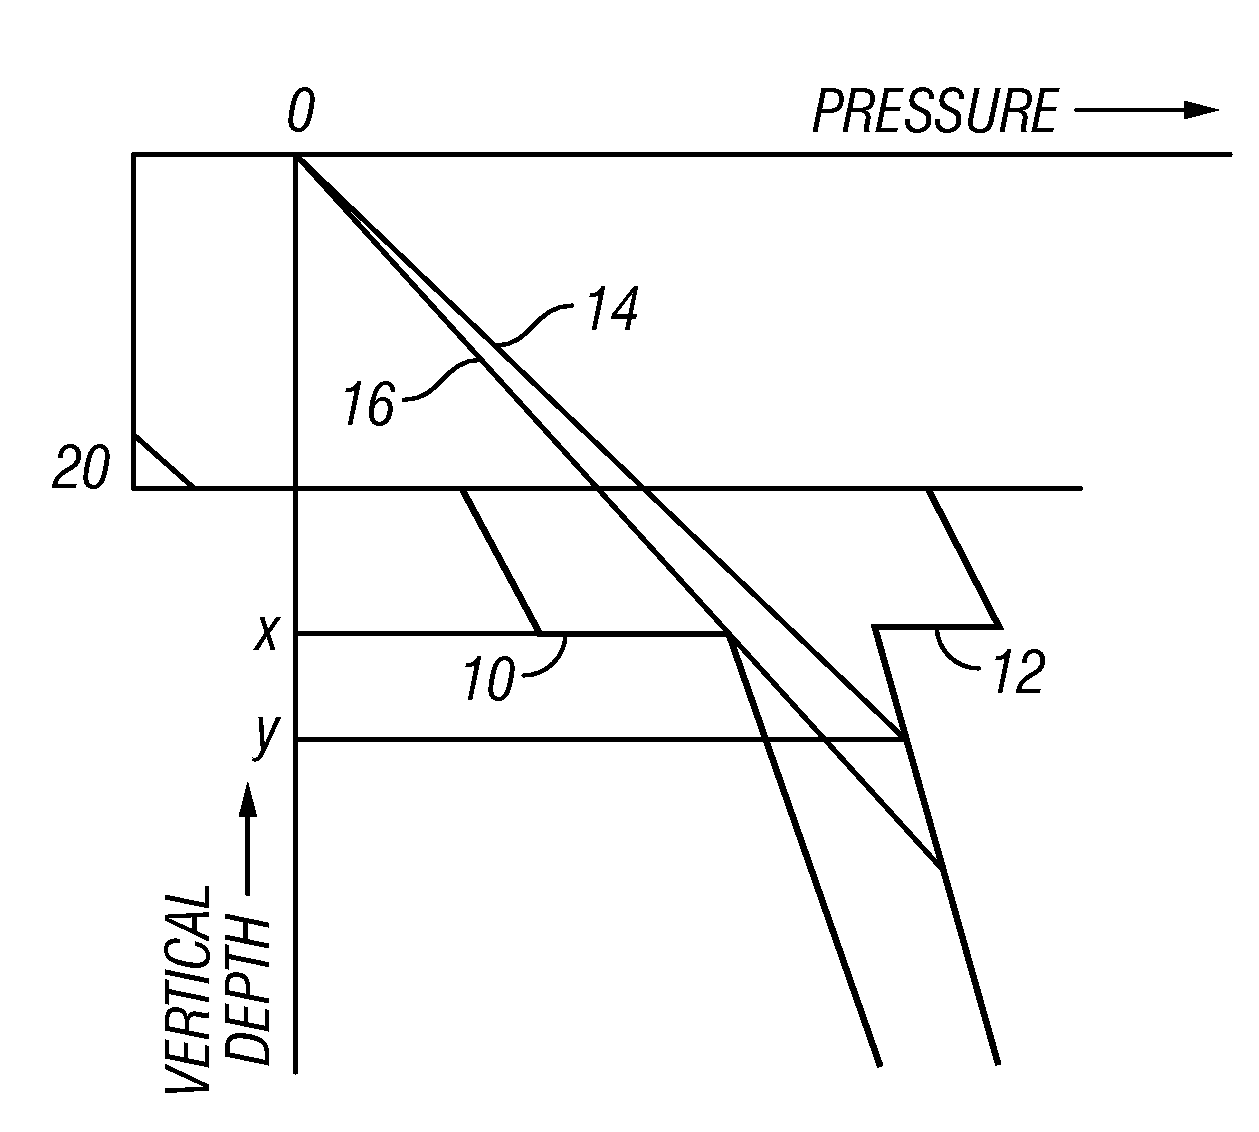 Method for Controlling Fluid Pressure in a Borehole Using a Dynamic Annular Pressure Control System